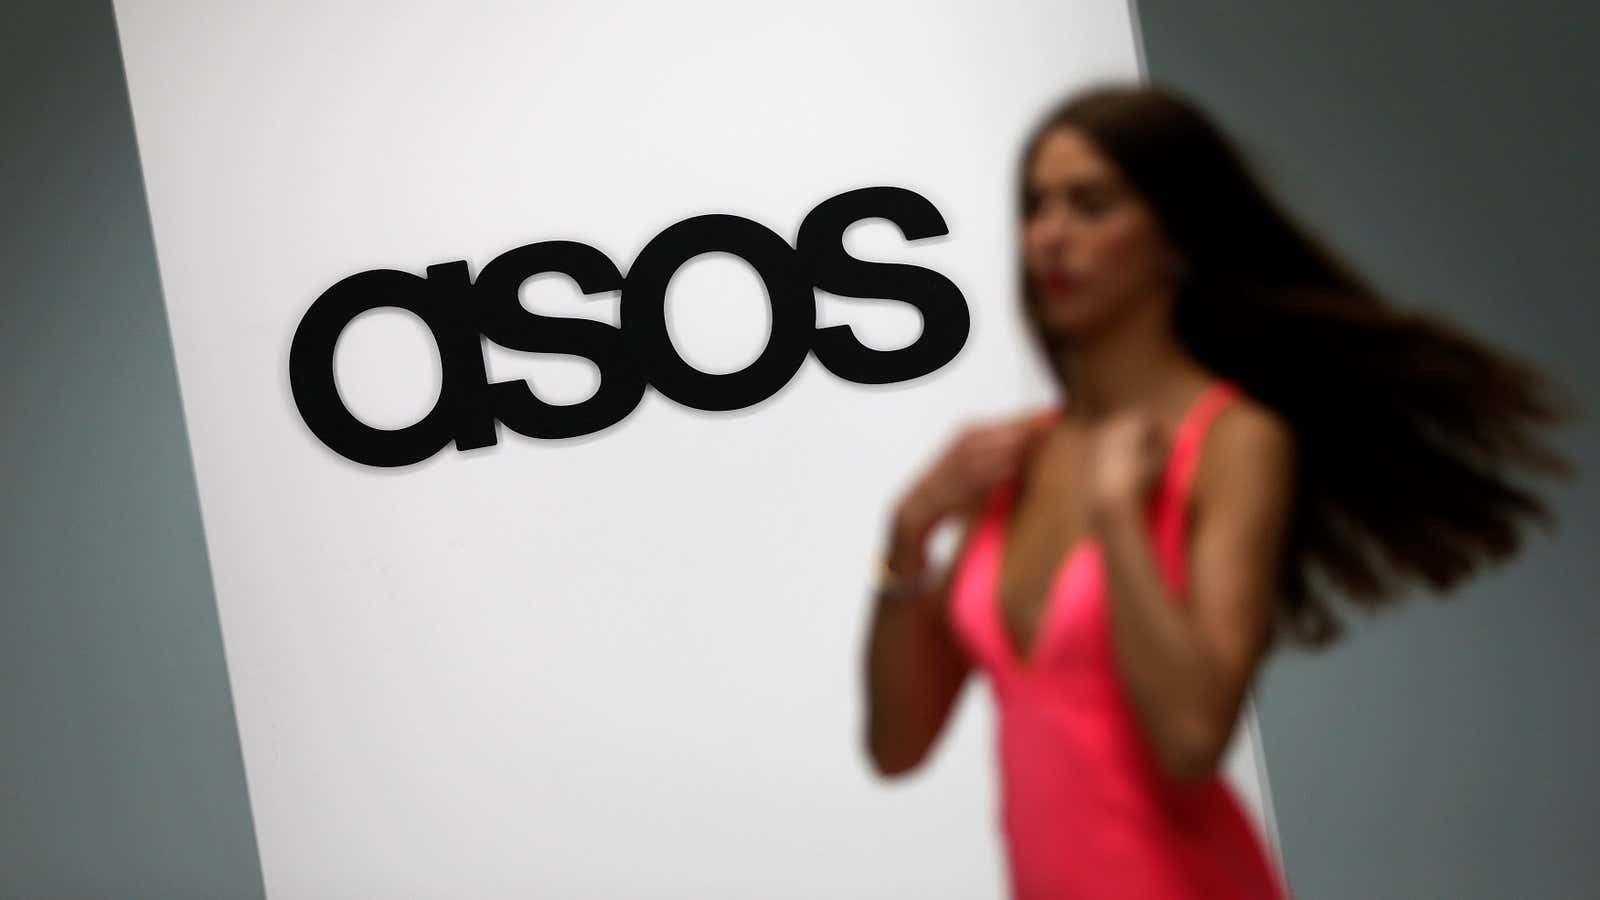 ASOS is always in a rush.